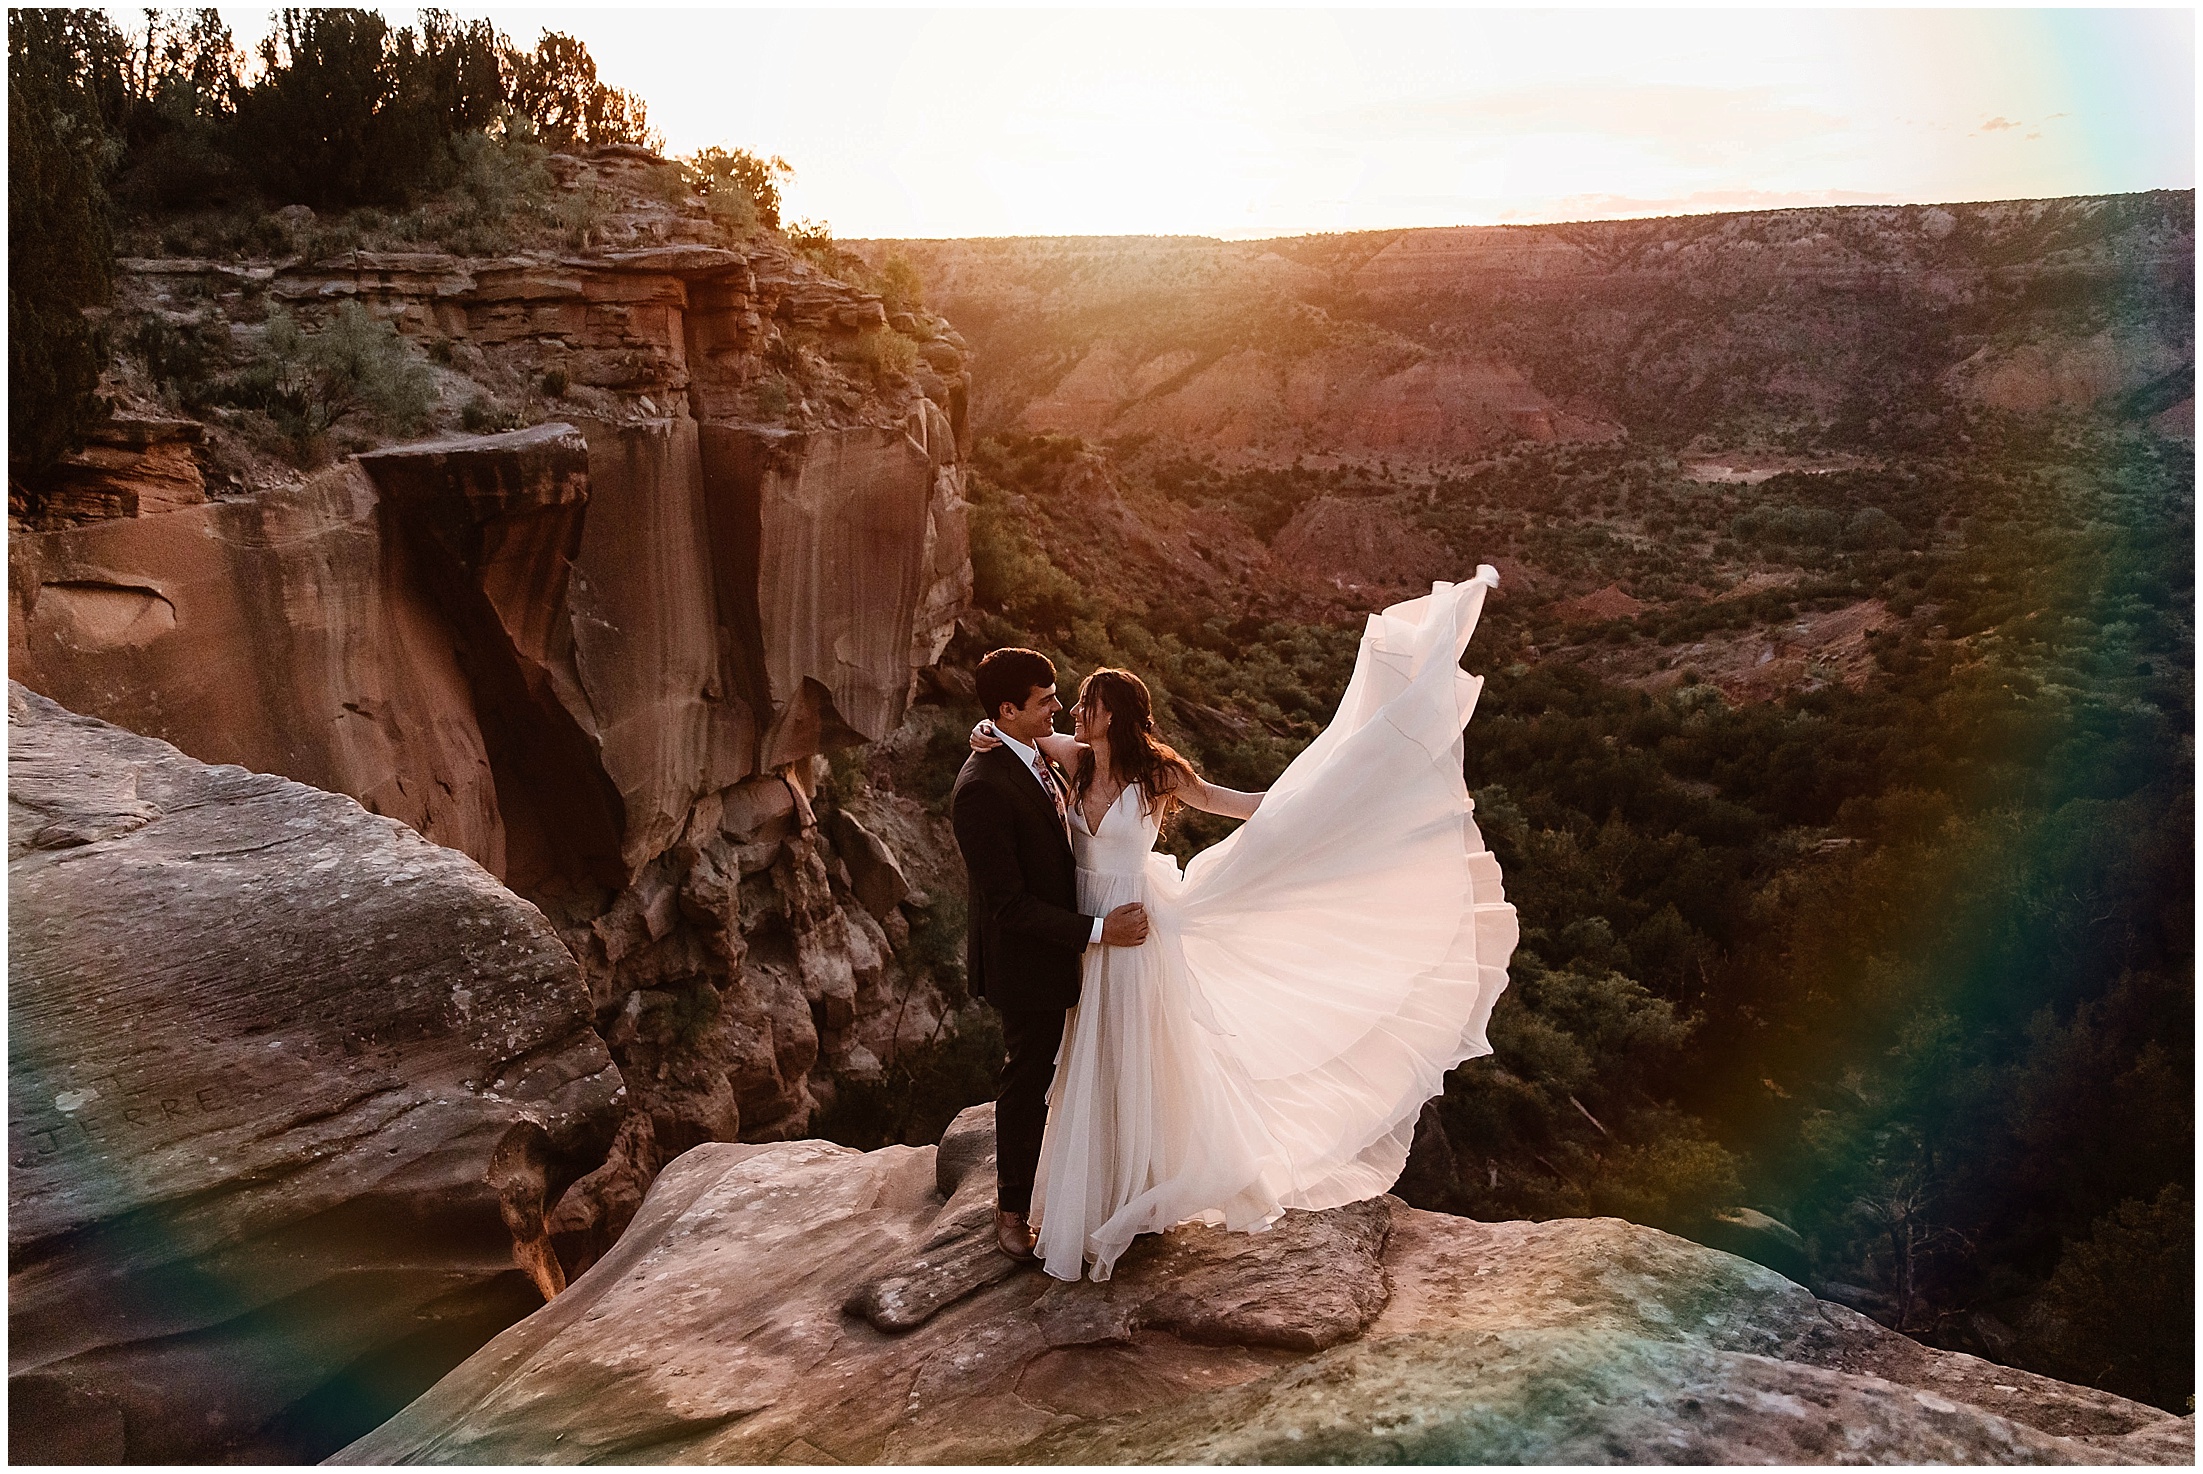 locations to elope in texas, Texas elopements, Big bend elopement, where can i get married in texas